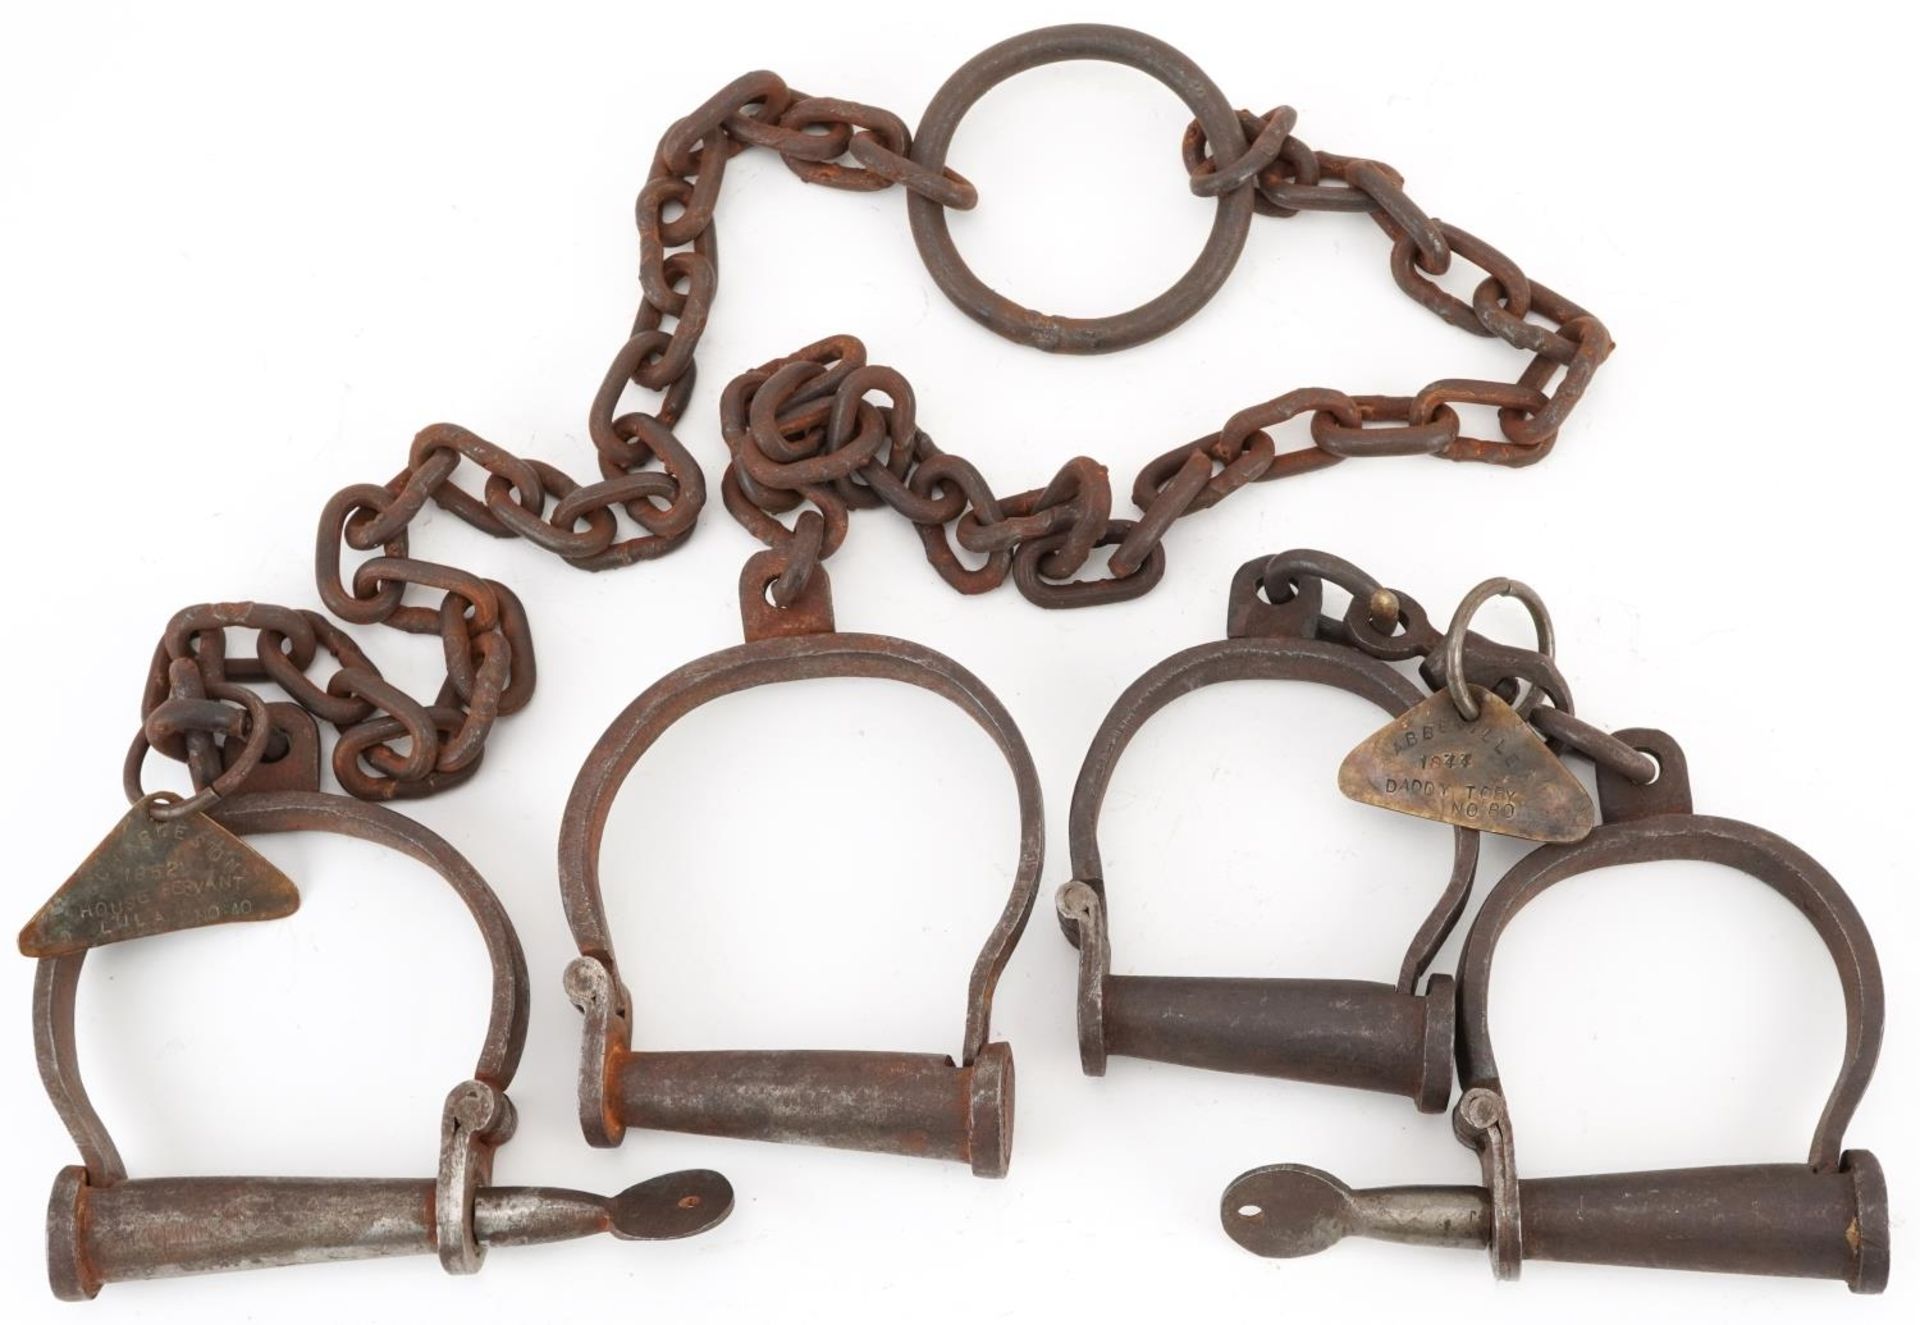 Two pairs of 19th century cast iron handcuffs with tags engraved Abbeville 1844 Daddy Toby no 88 and